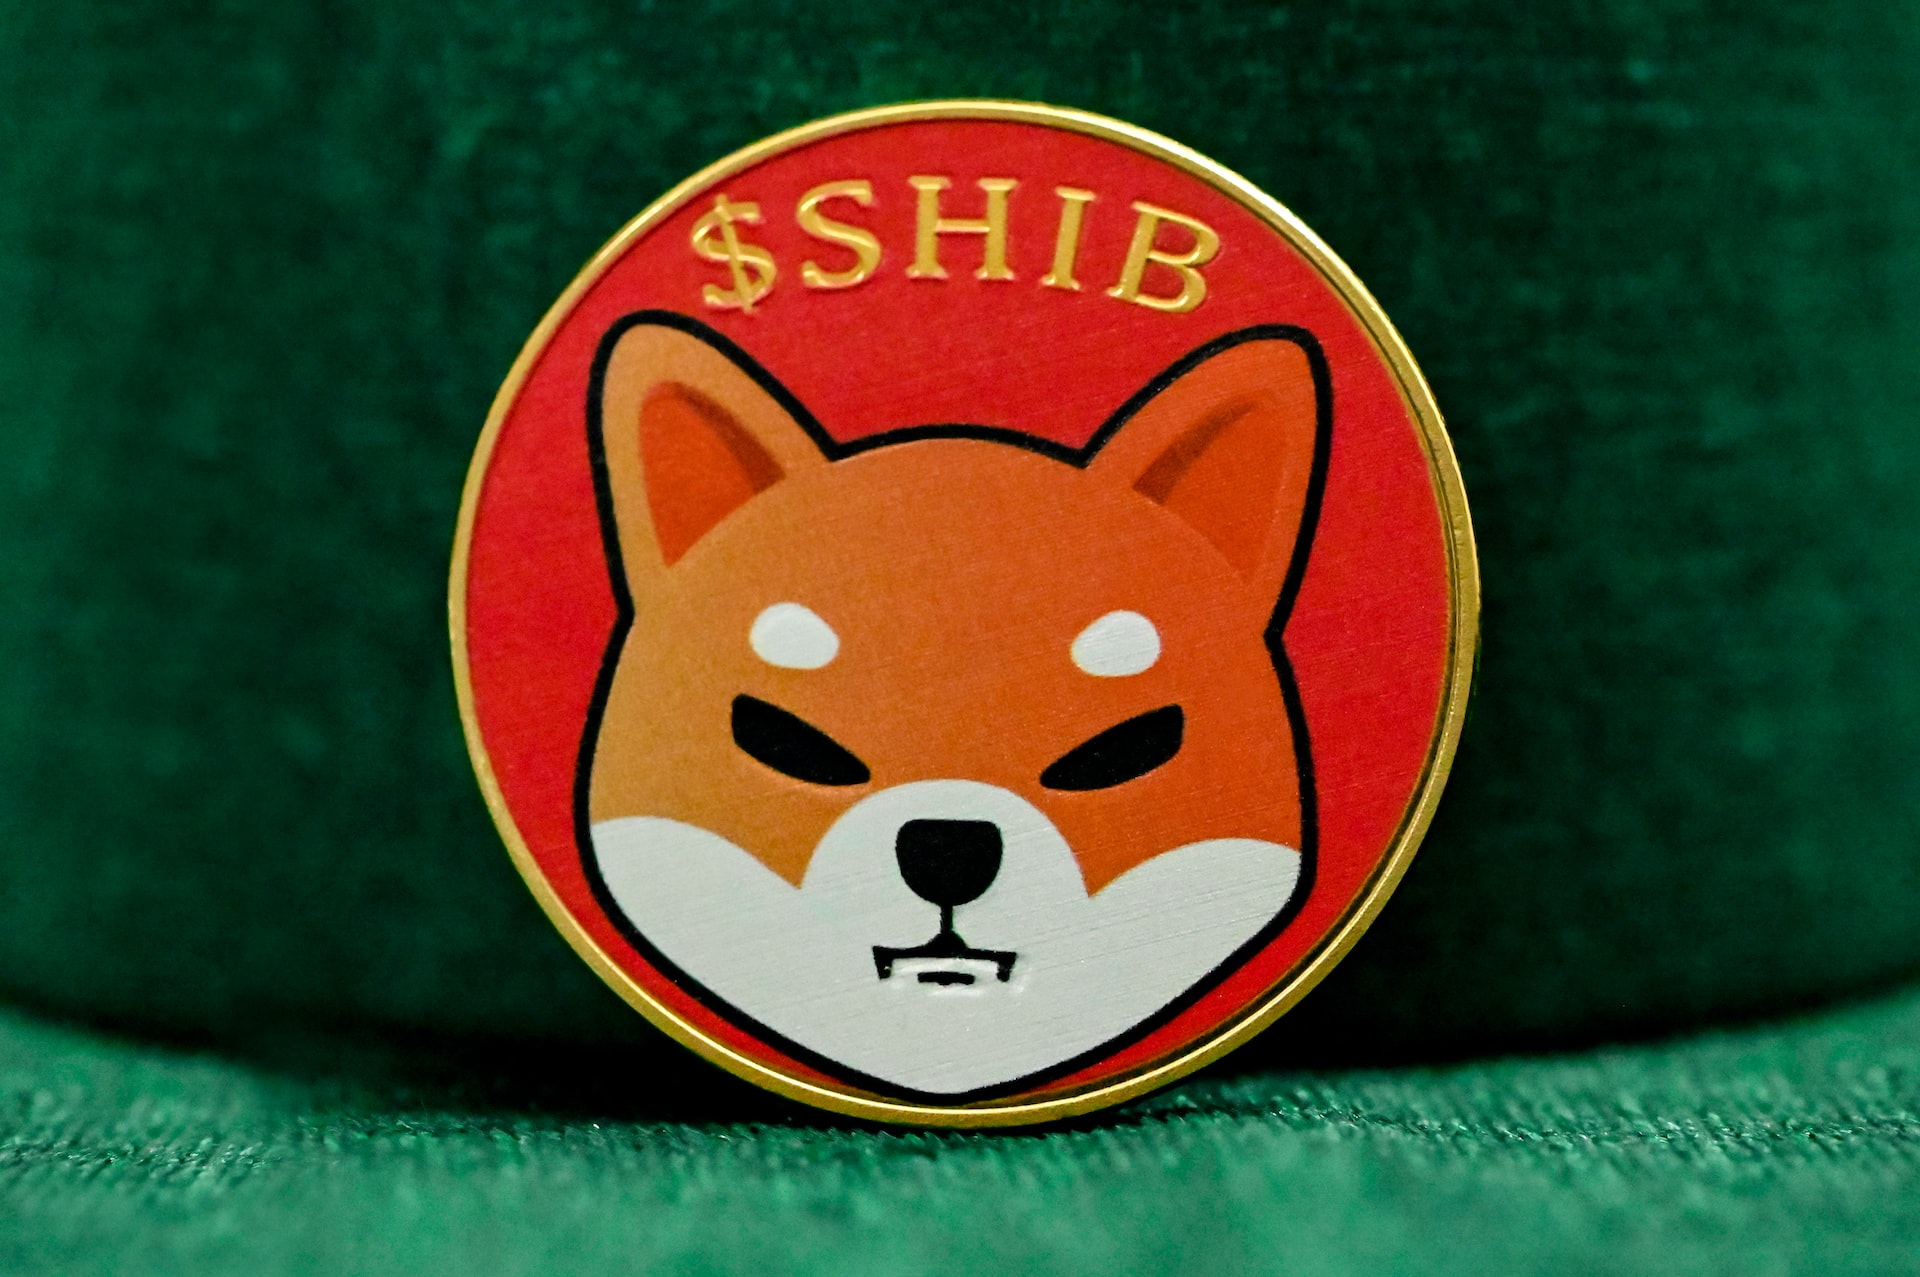 Shiba Inu ($SHIB) Secures $12M in Funding for Development of Privacy-Focused Layer-3 Blockchain